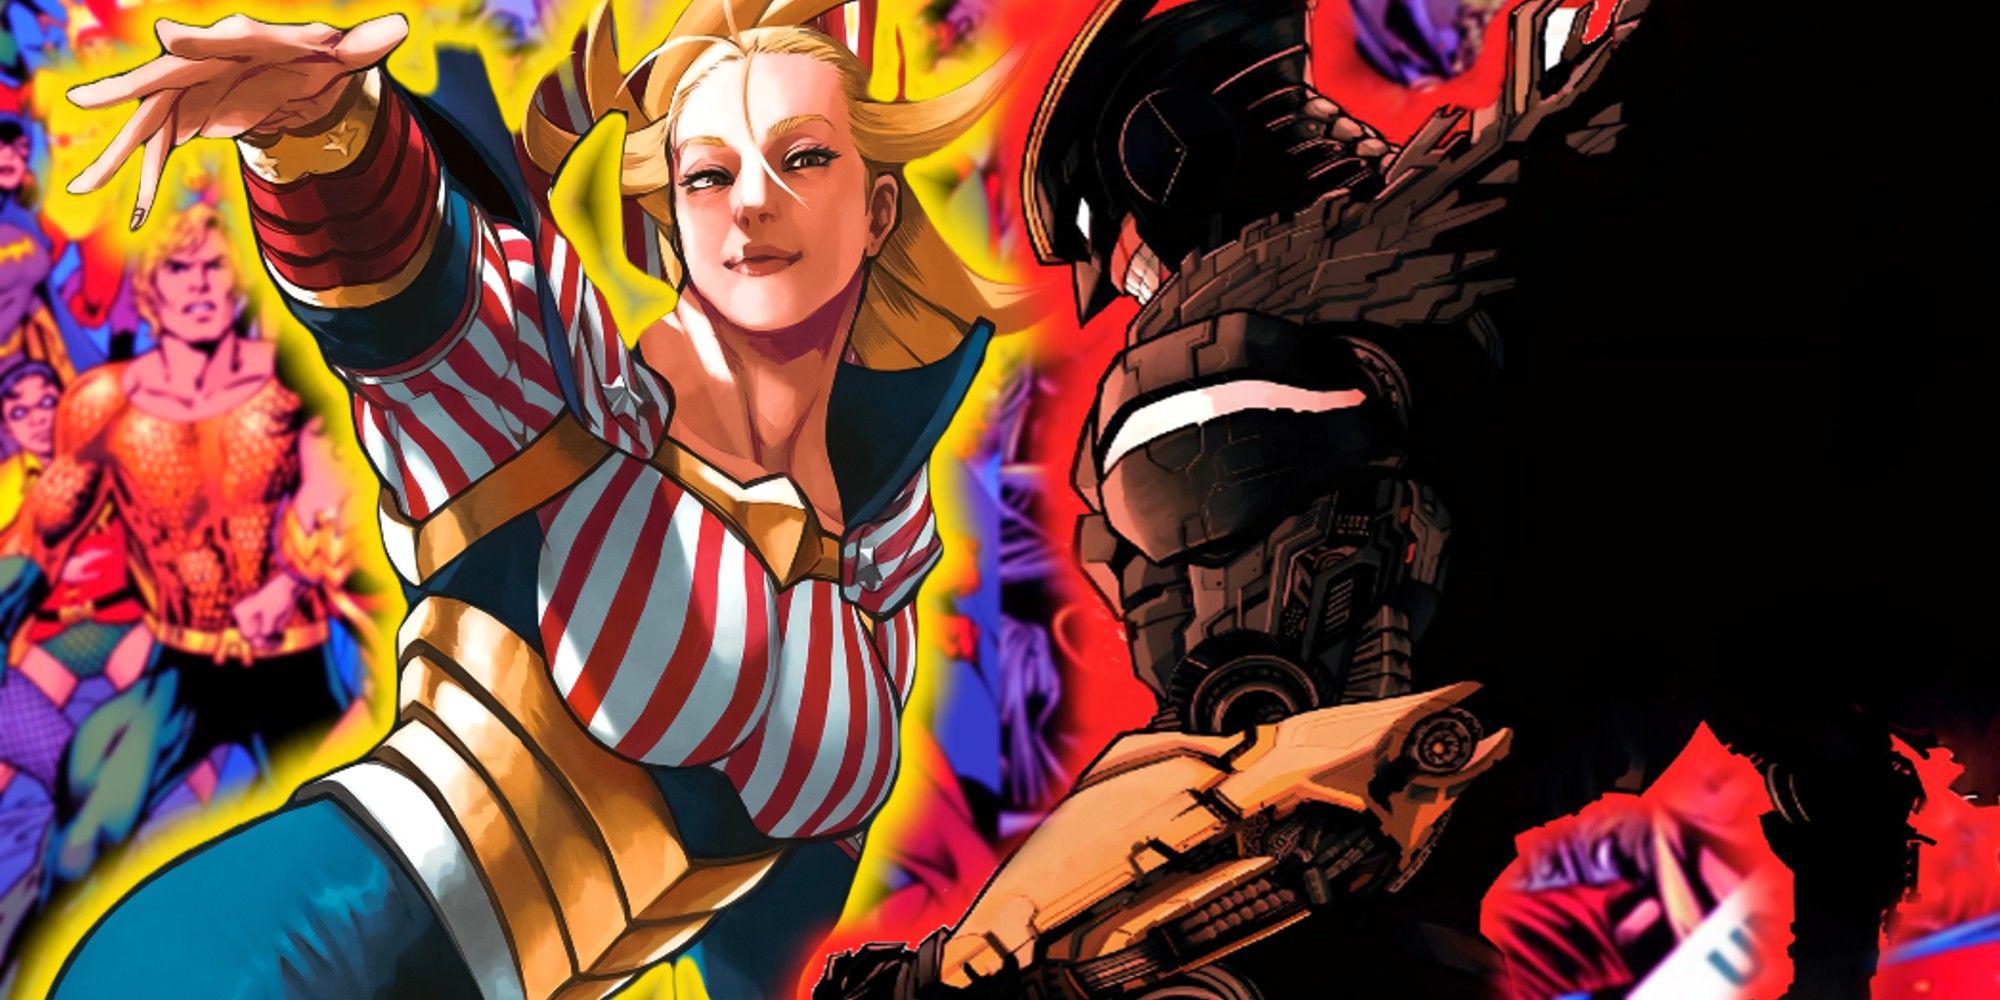 Image of All Might and Star and Stripe